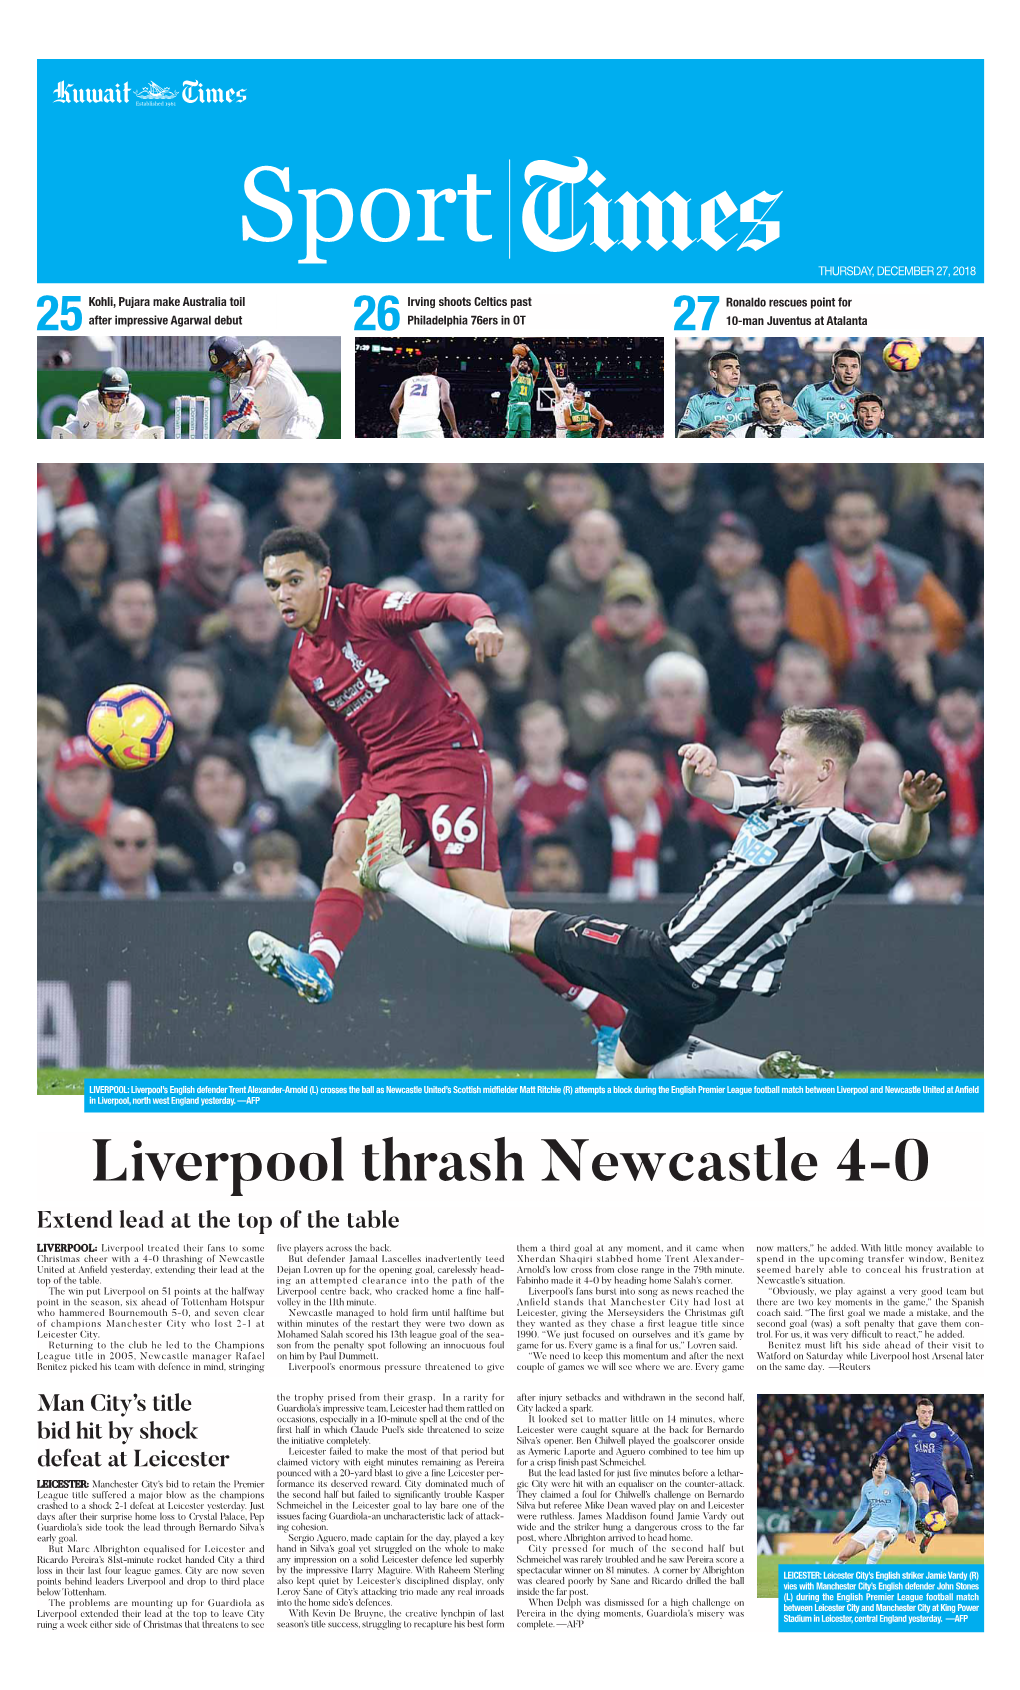 Liverpool Thrash Newcastle 4-0 Extend Lead at the Top of the Table